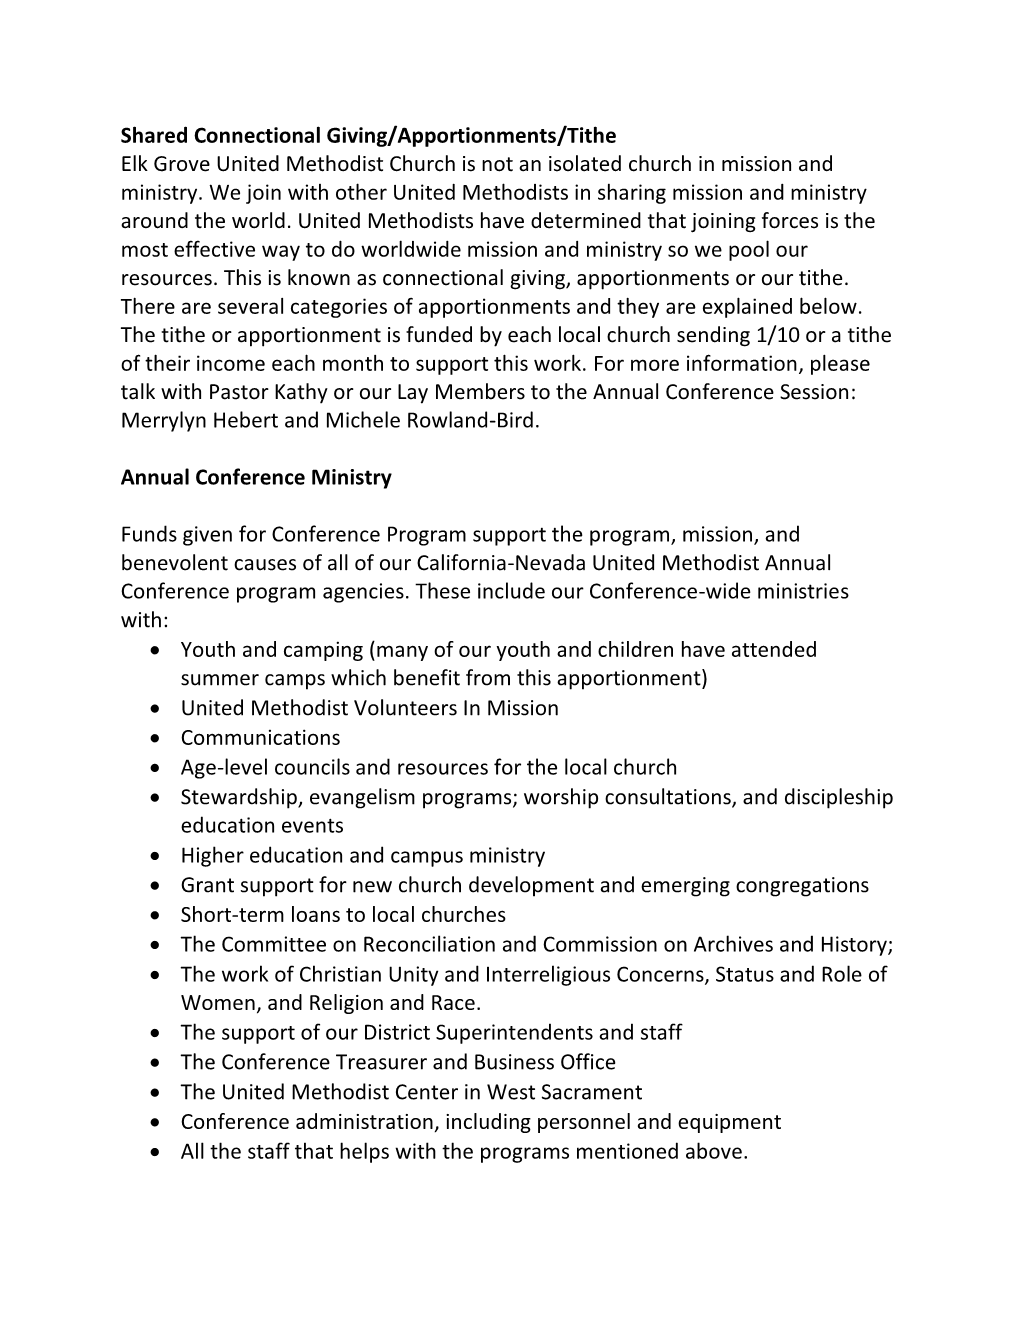 Shared Connectional Giving/Apportionments/Tithe Elk Grove United Methodist Church Is Not an Isolated Church in Mission and Ministry